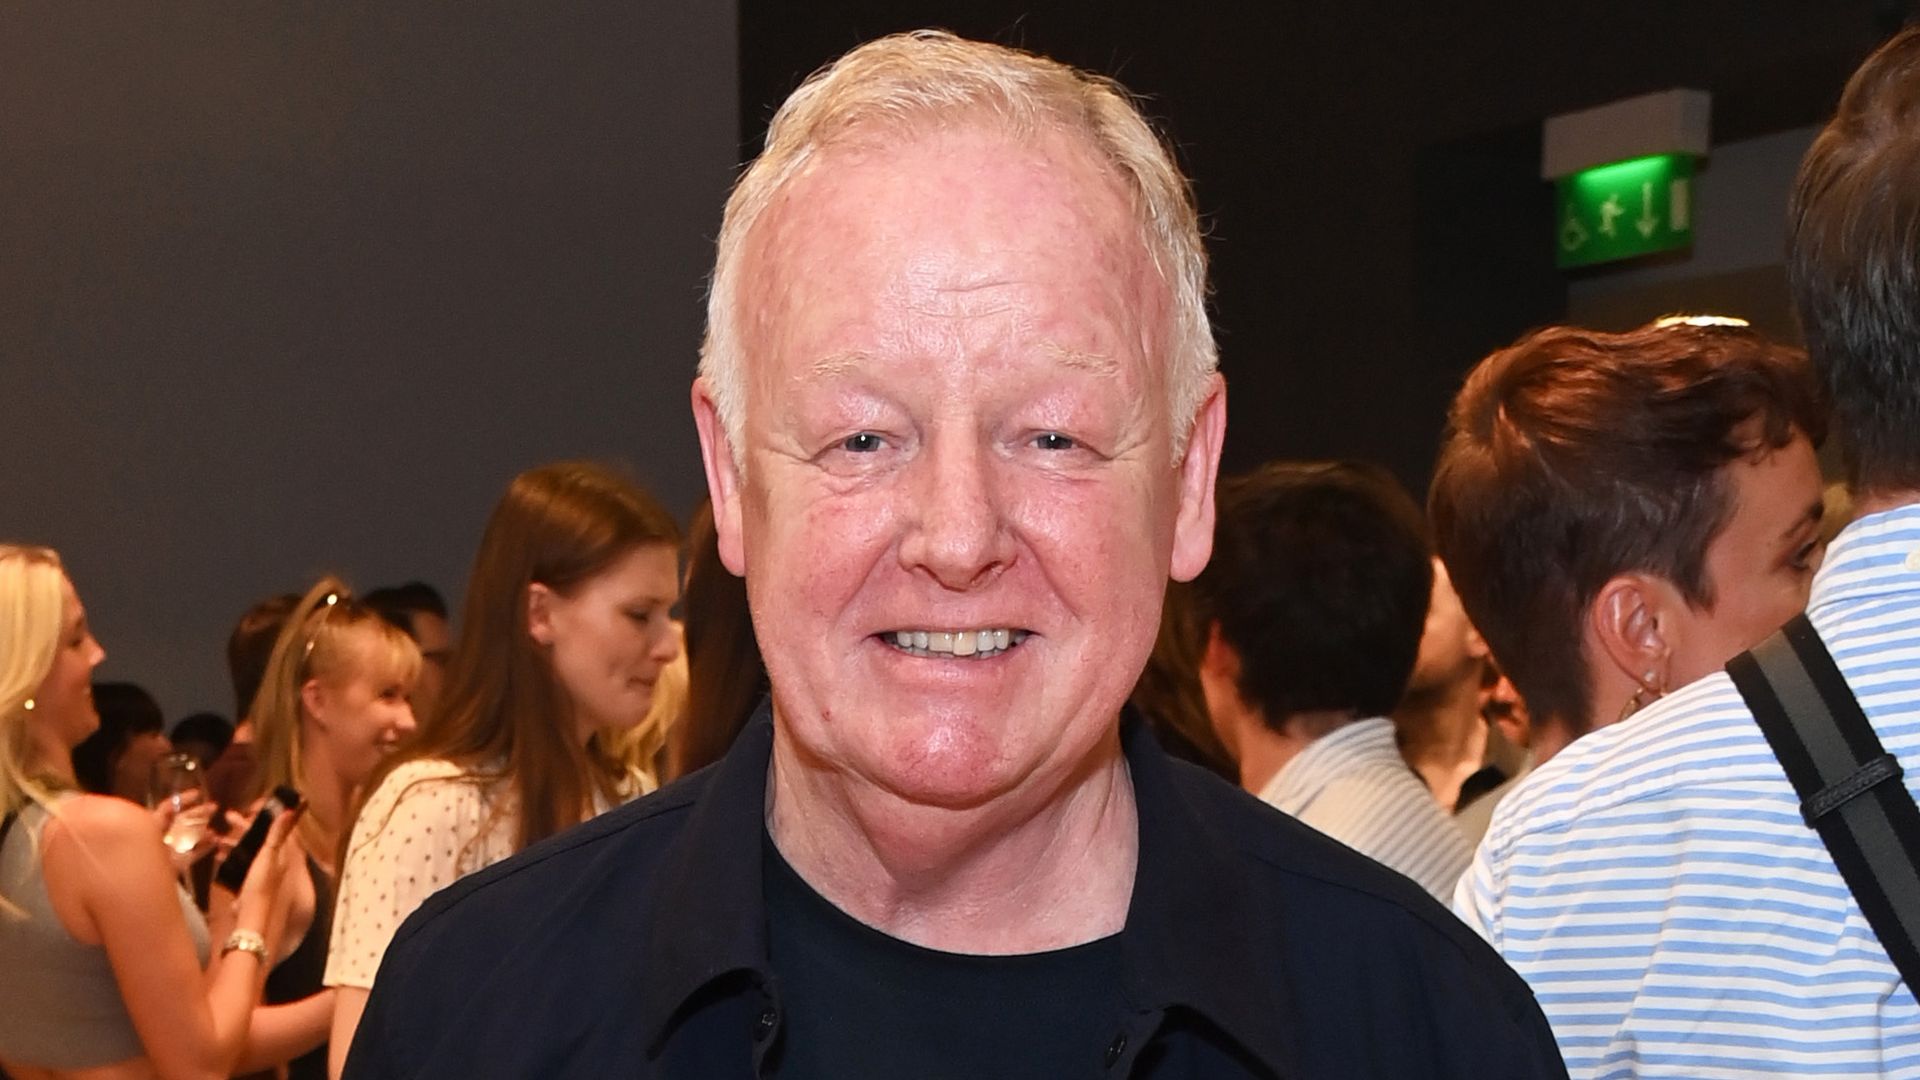 les dennis smiling after party 42nd street